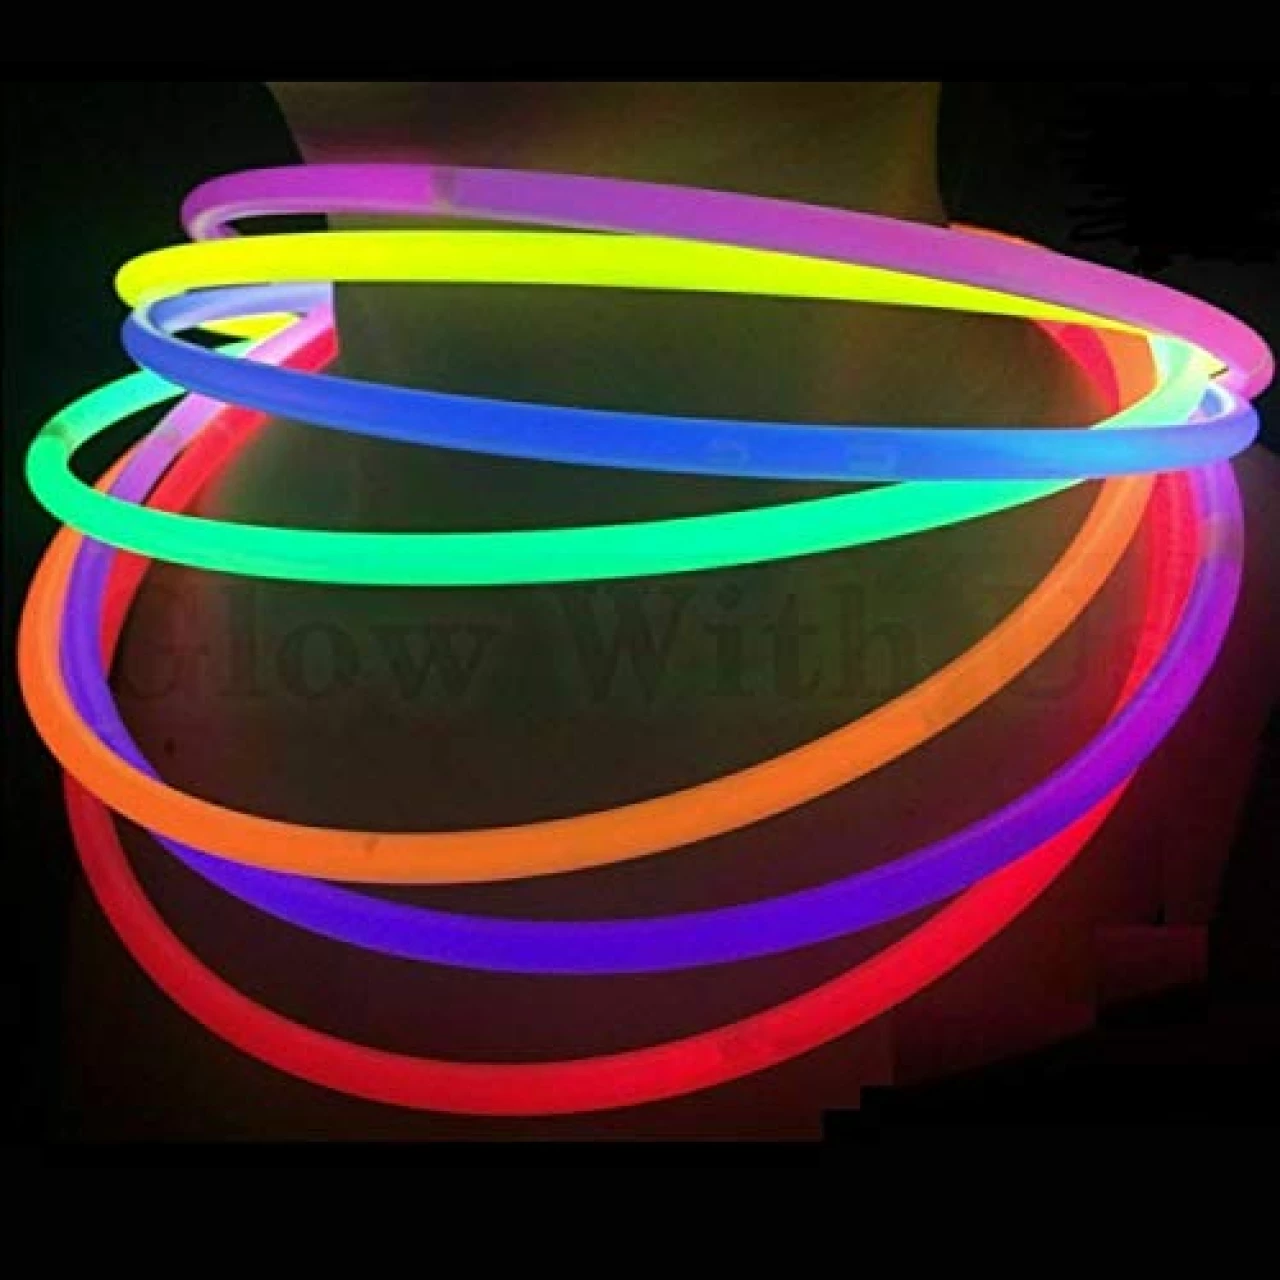 Glow Sticks Bulk Wholesale Necklaces, 100 22&quot; Glow Stick Necklaces, Bright Colors, Glow 8-12 Hr, Connector Pre-attached(handy), Glow-in-the-dark Party Supplies, GlowWithUs Brand